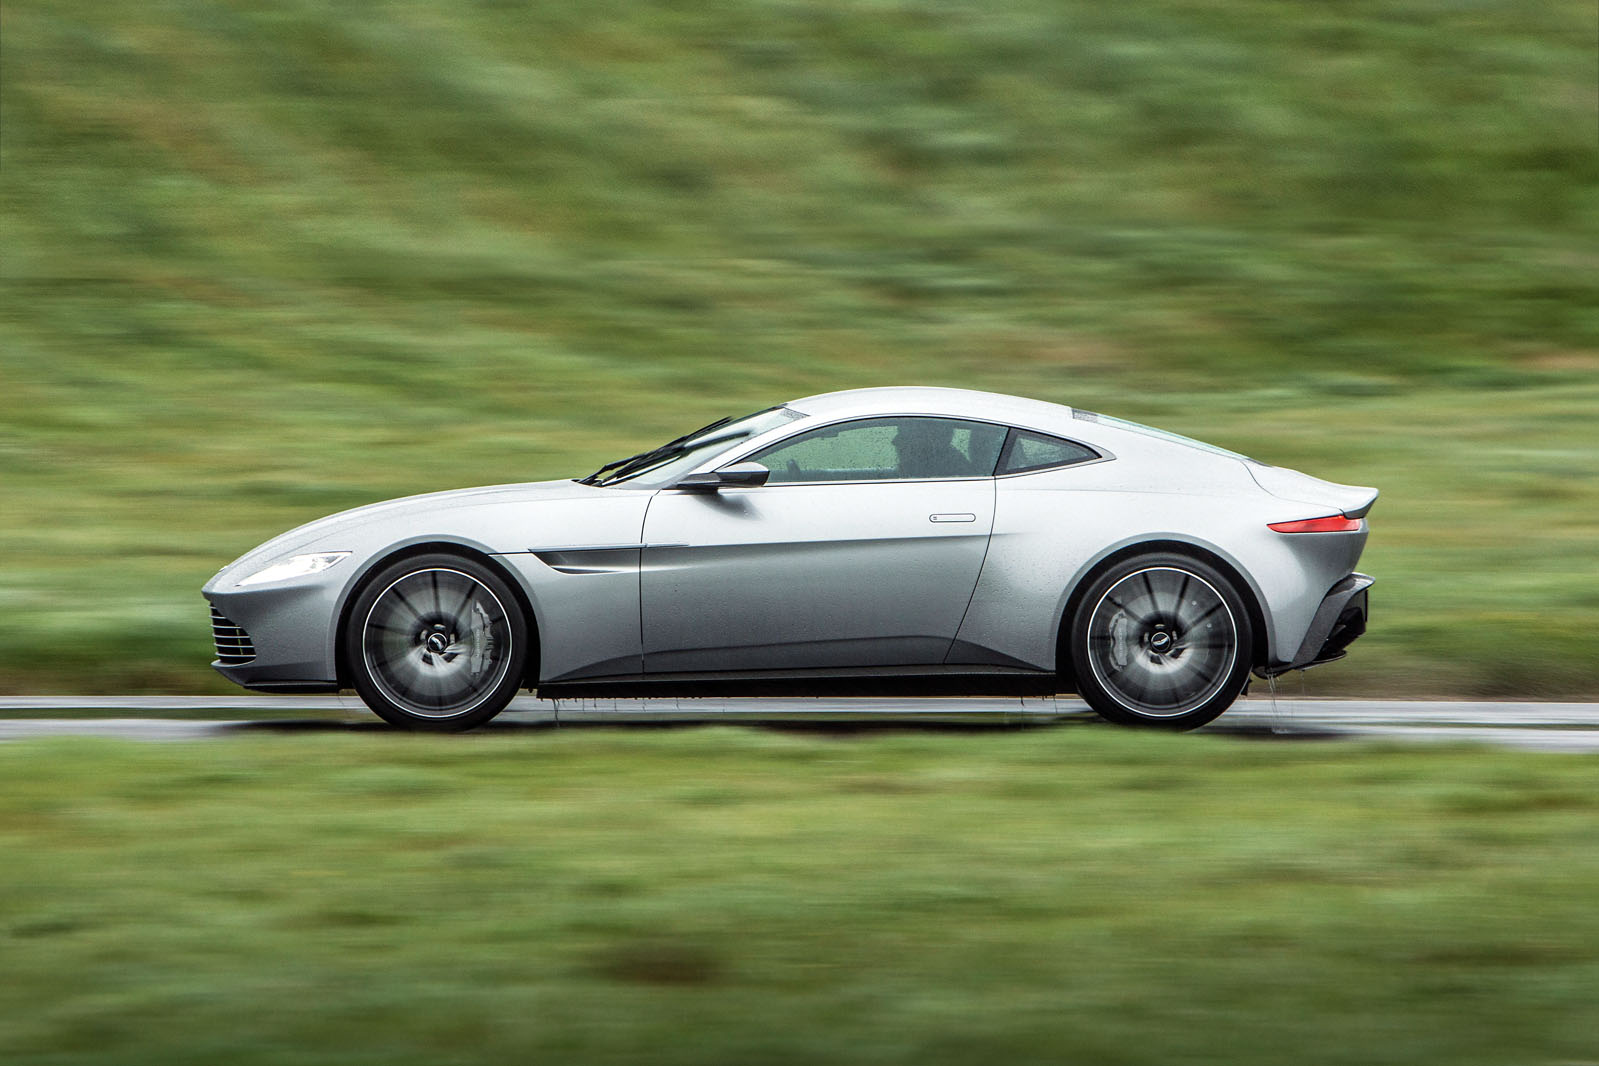 The Aston Martin DB10 is completely tailormade